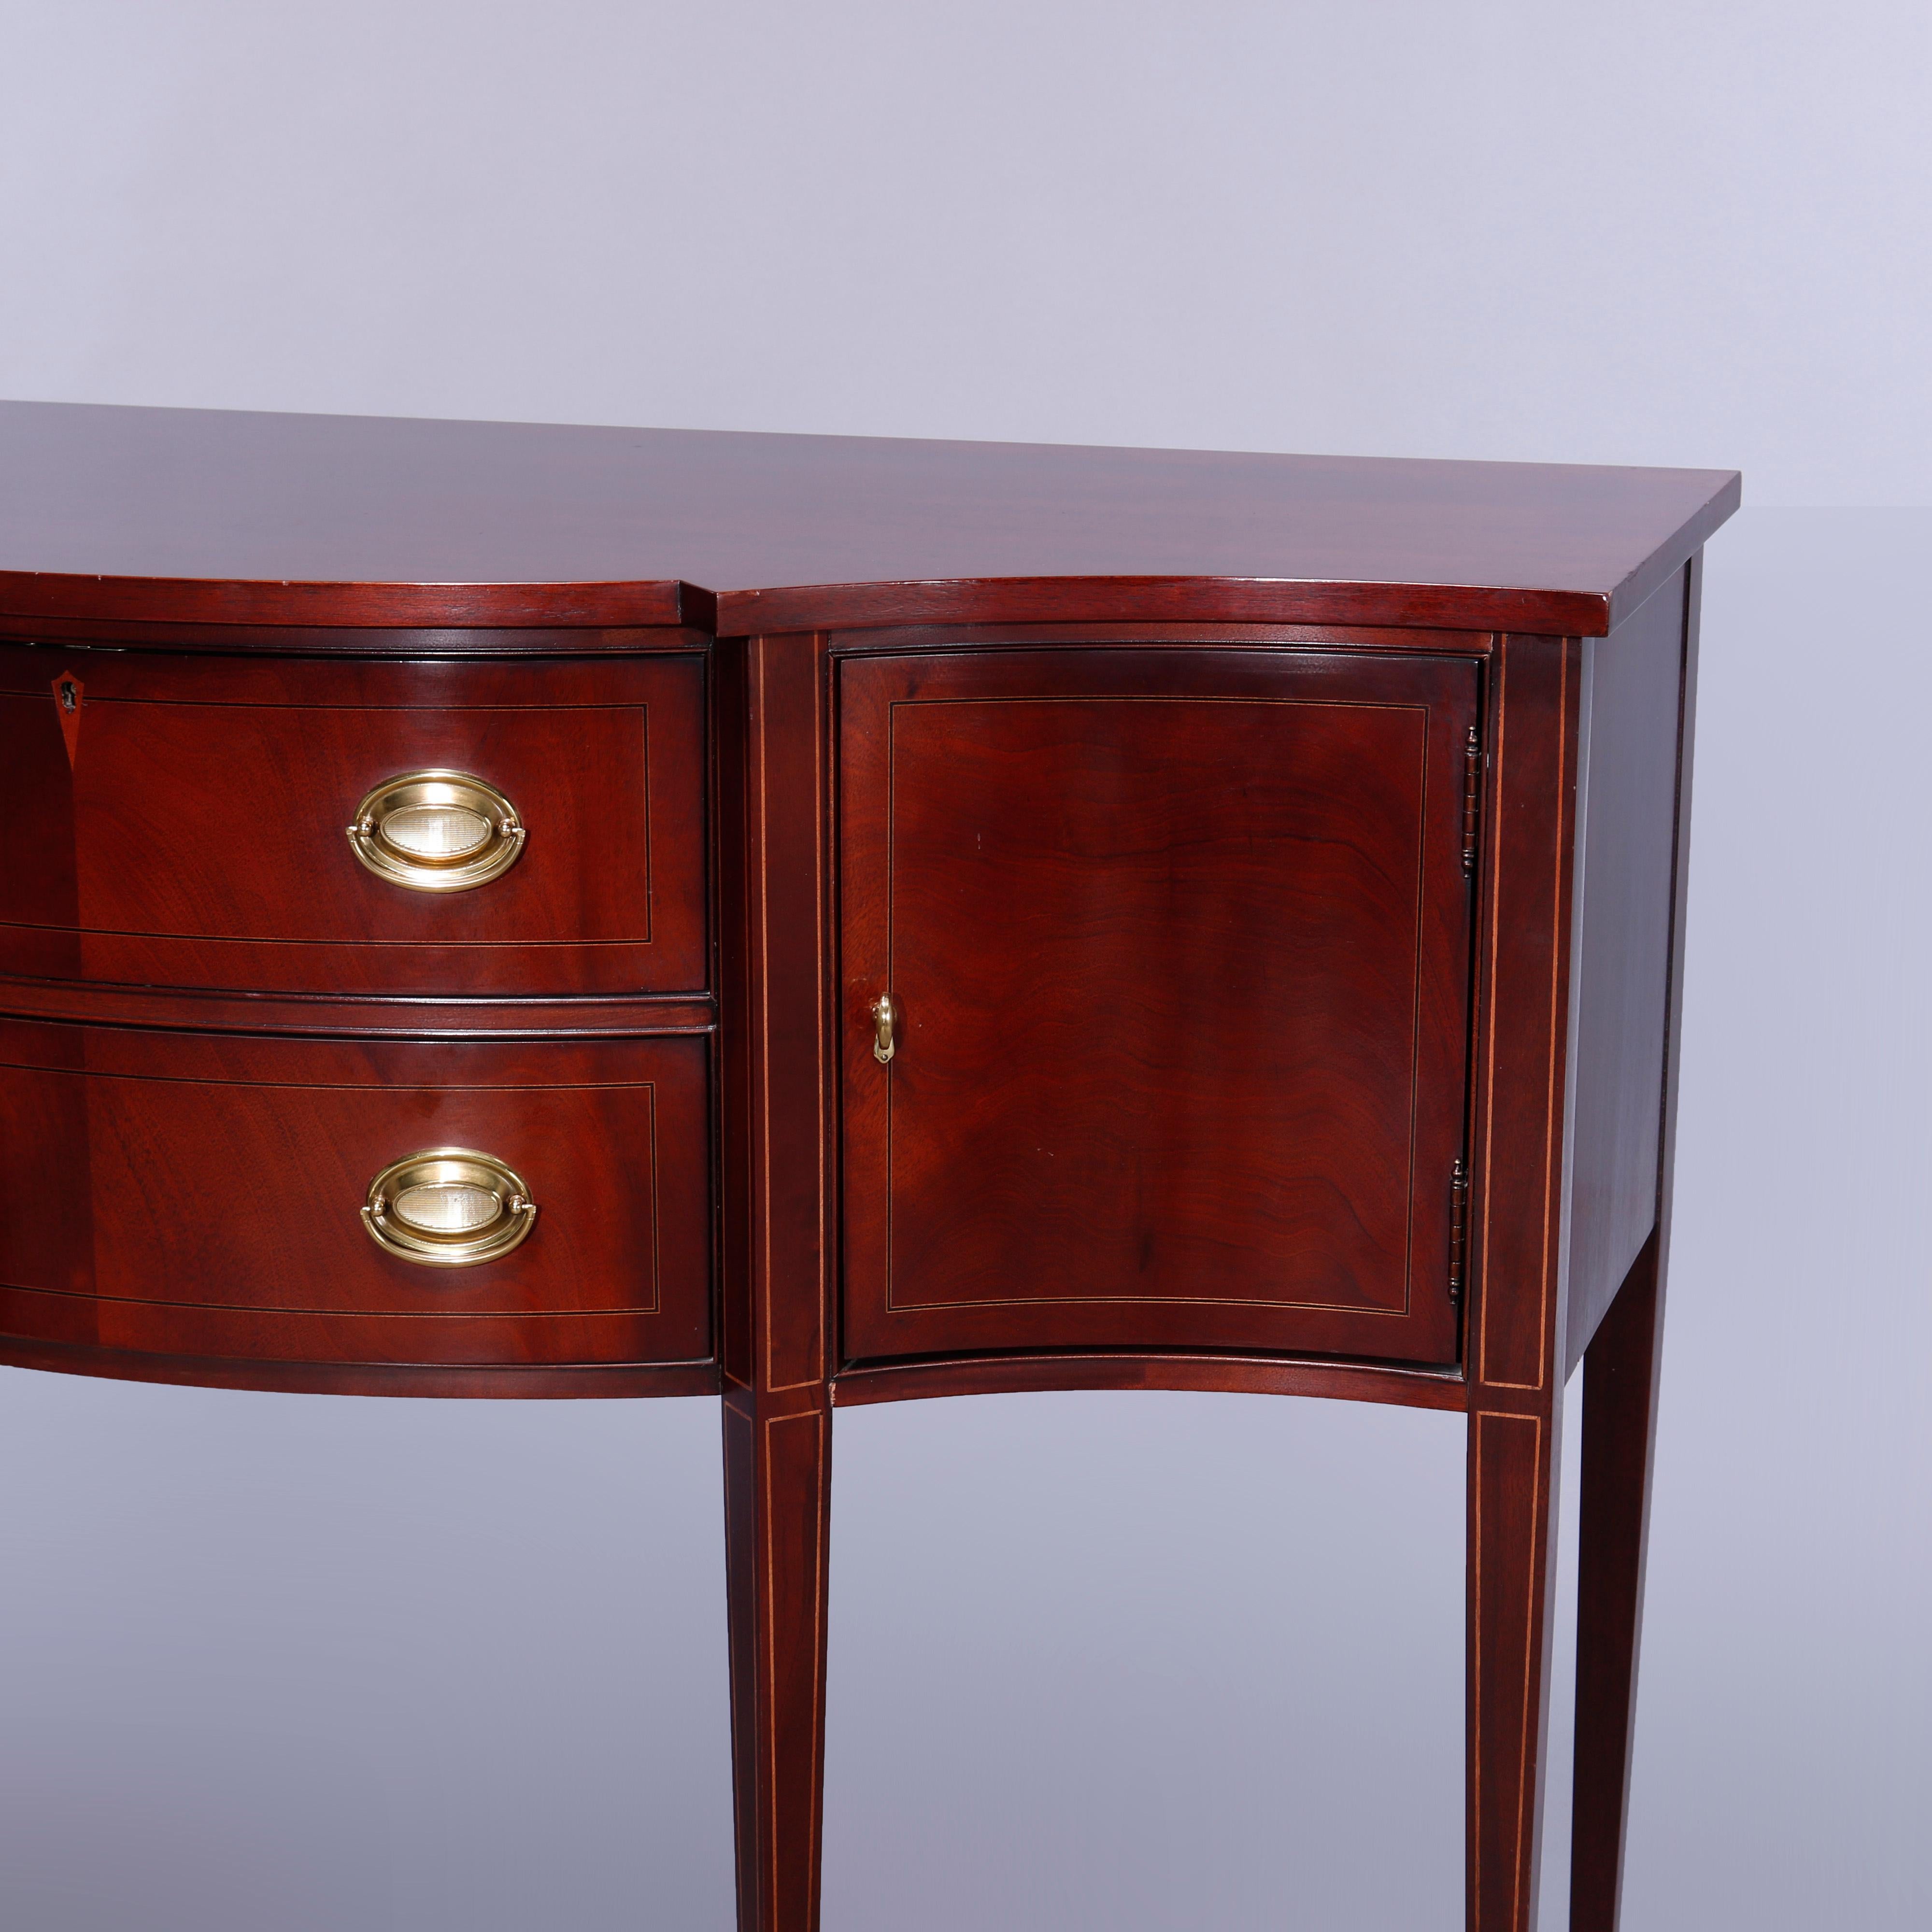 American Hepplewhite Style Hickory Chair Inlaid Mahogany Silver Server Sideboard 20th C